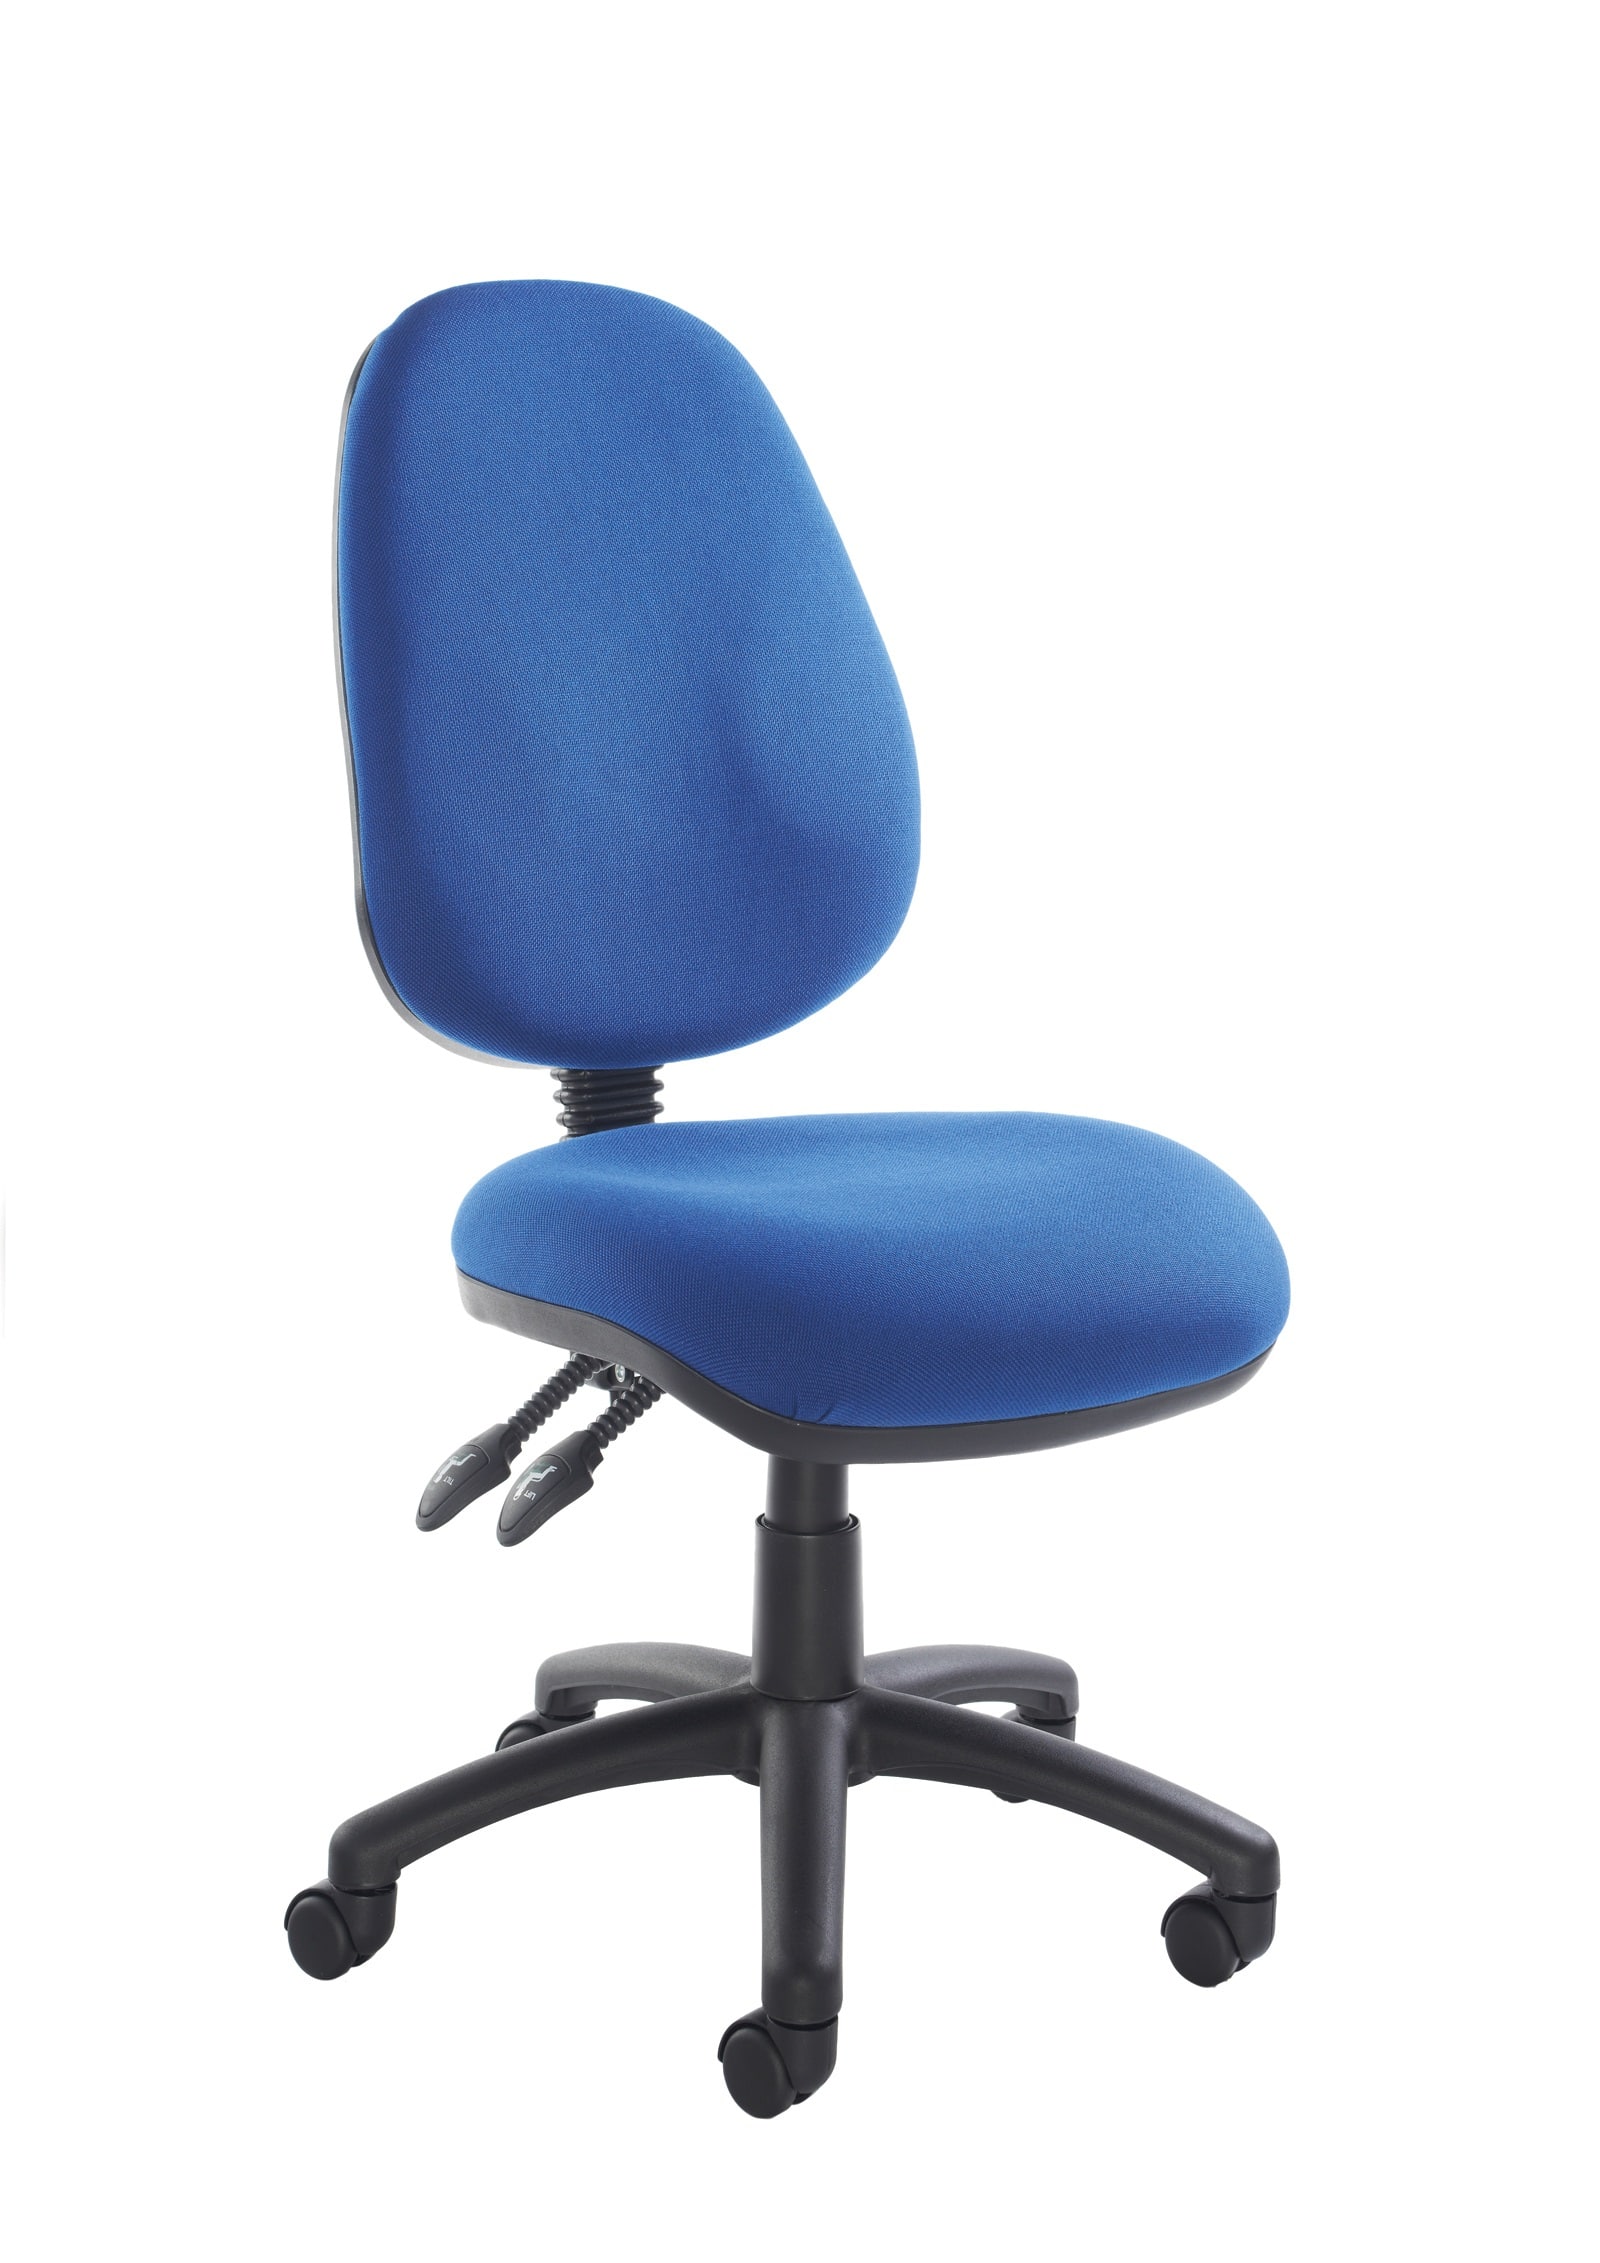 Blue Inc Ness Mesh Fabric Operator Chair With & Without Arms Home Office Computer VAT Inc 